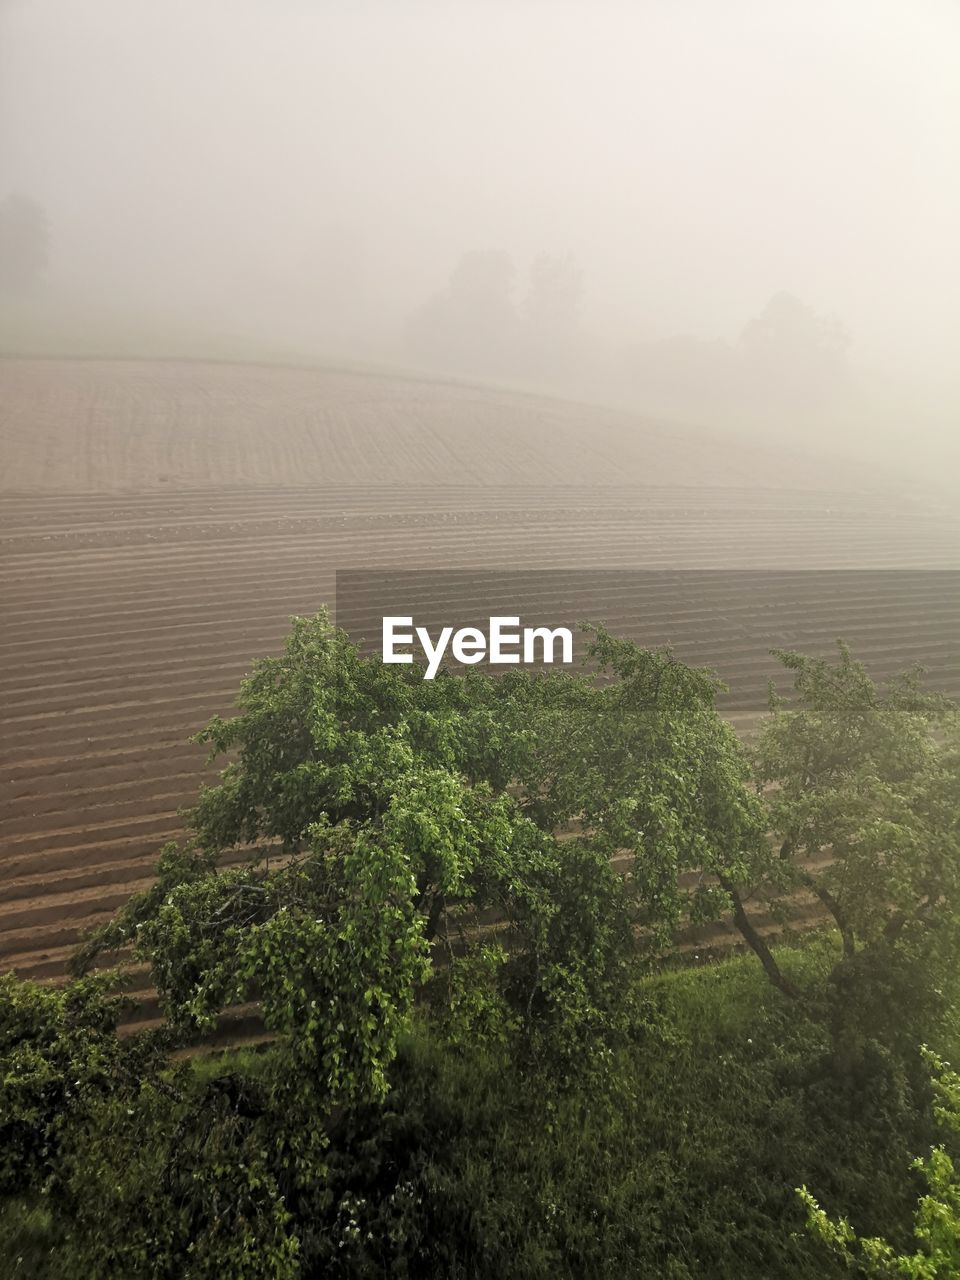 SCENIC VIEW OF LANDSCAPE AGAINST SKY DURING FOGGY WEATHER